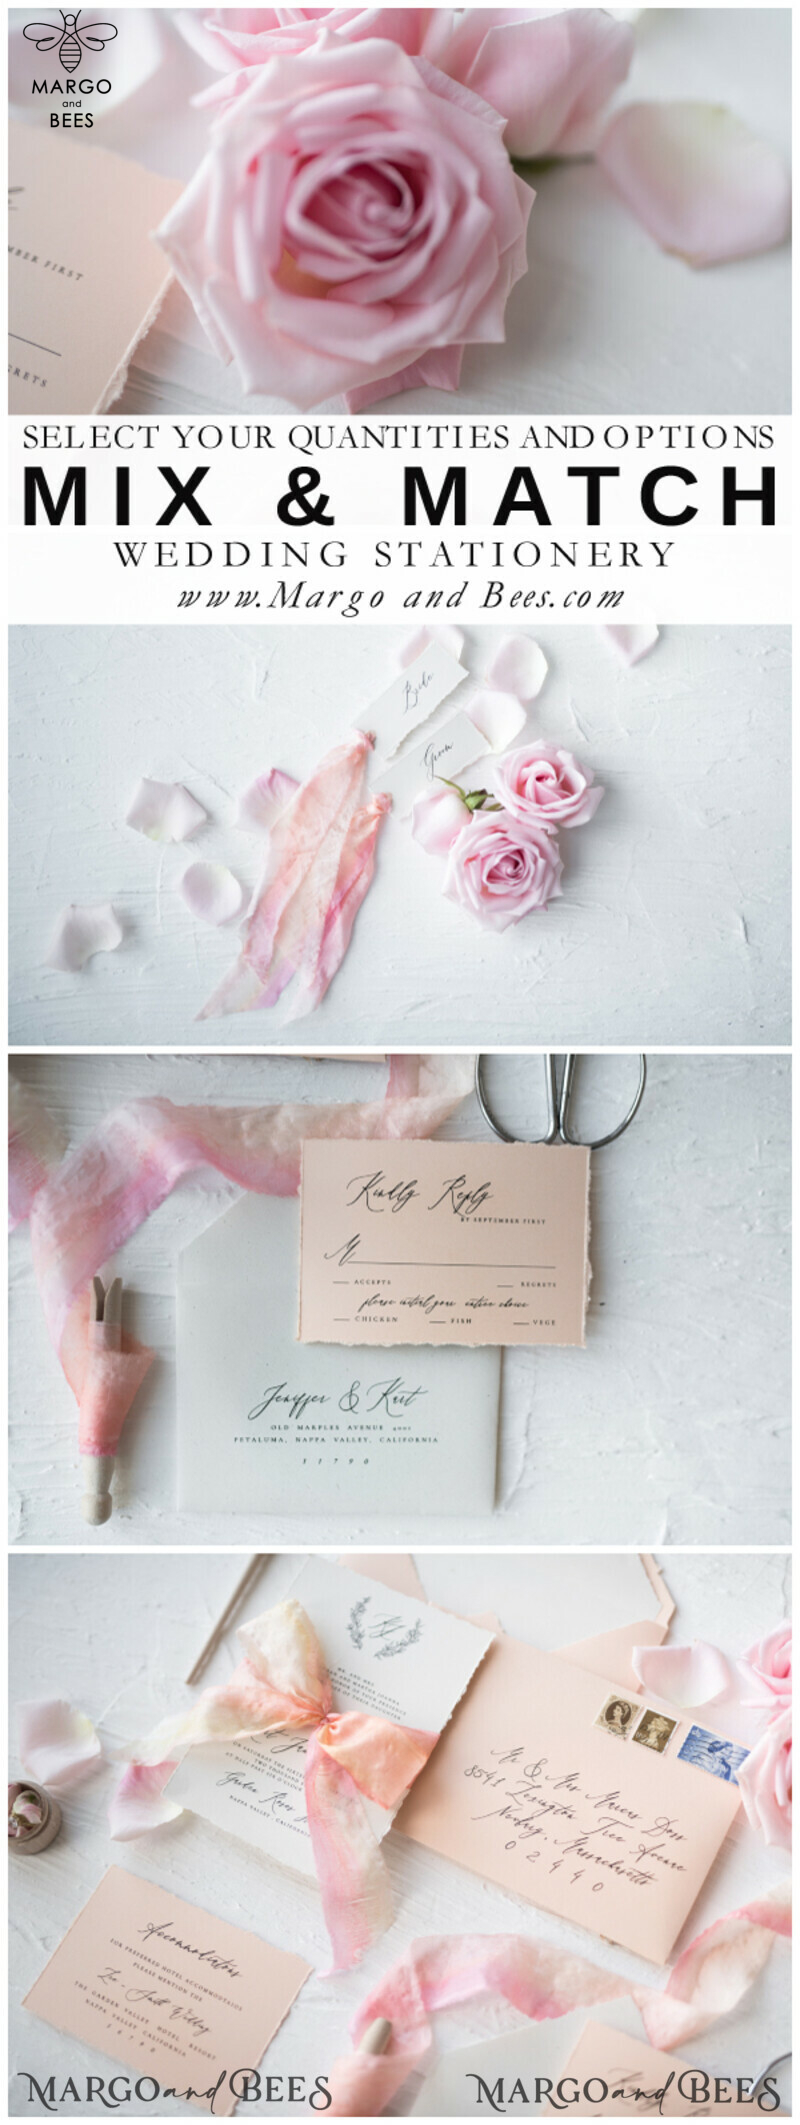 Minimalistic Peach Wedding Invitations: Elegant White Wedding Invites With Hand Dyed Ribbon and Vintage Wedding Cards - Handmade Wedding Invitation Suite-11